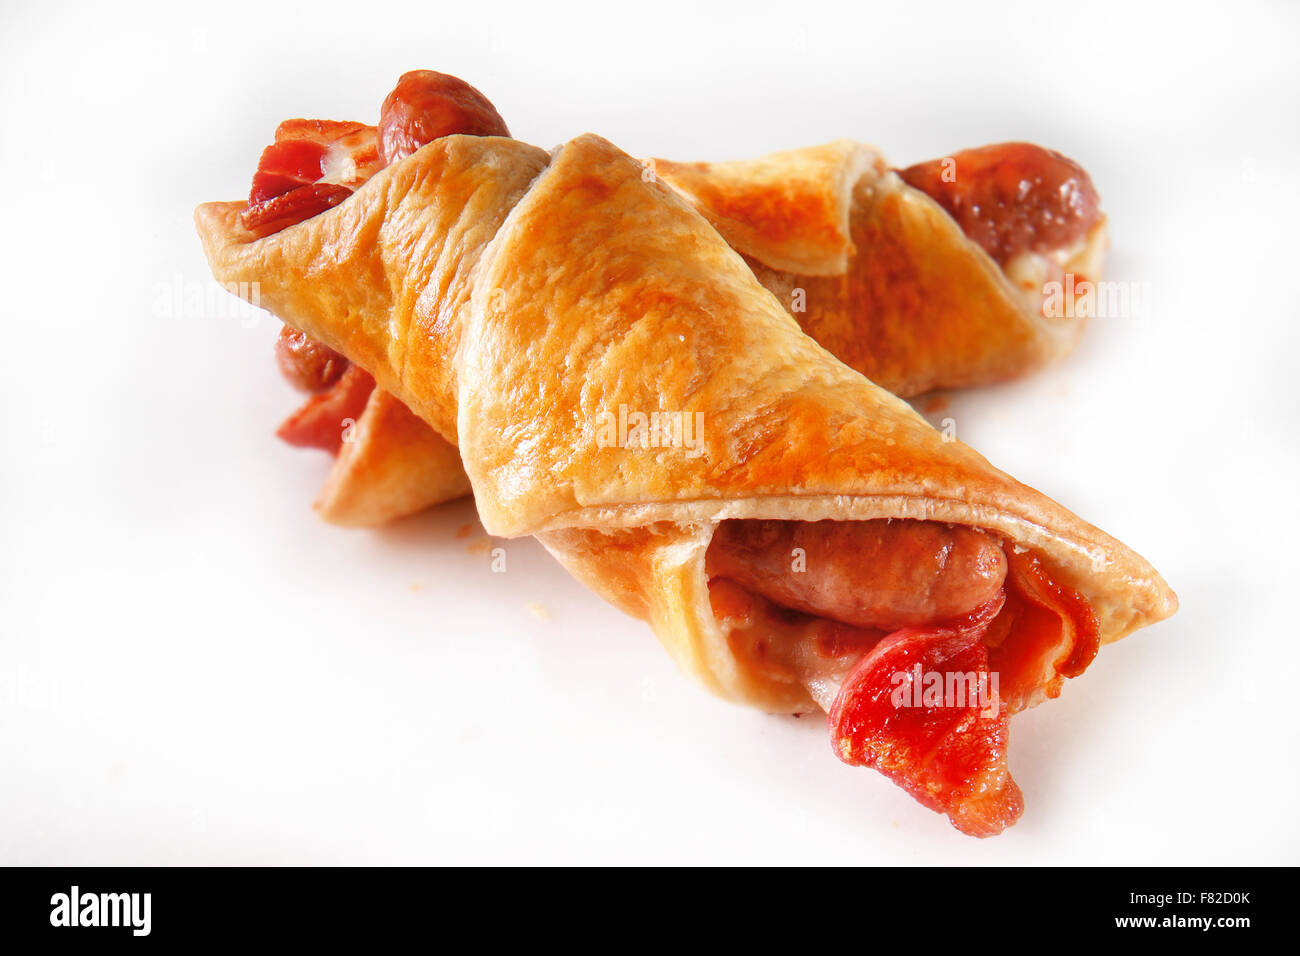 Sausauge & Bacon in puff pastry pastry roll snack against a white background Stock Photo